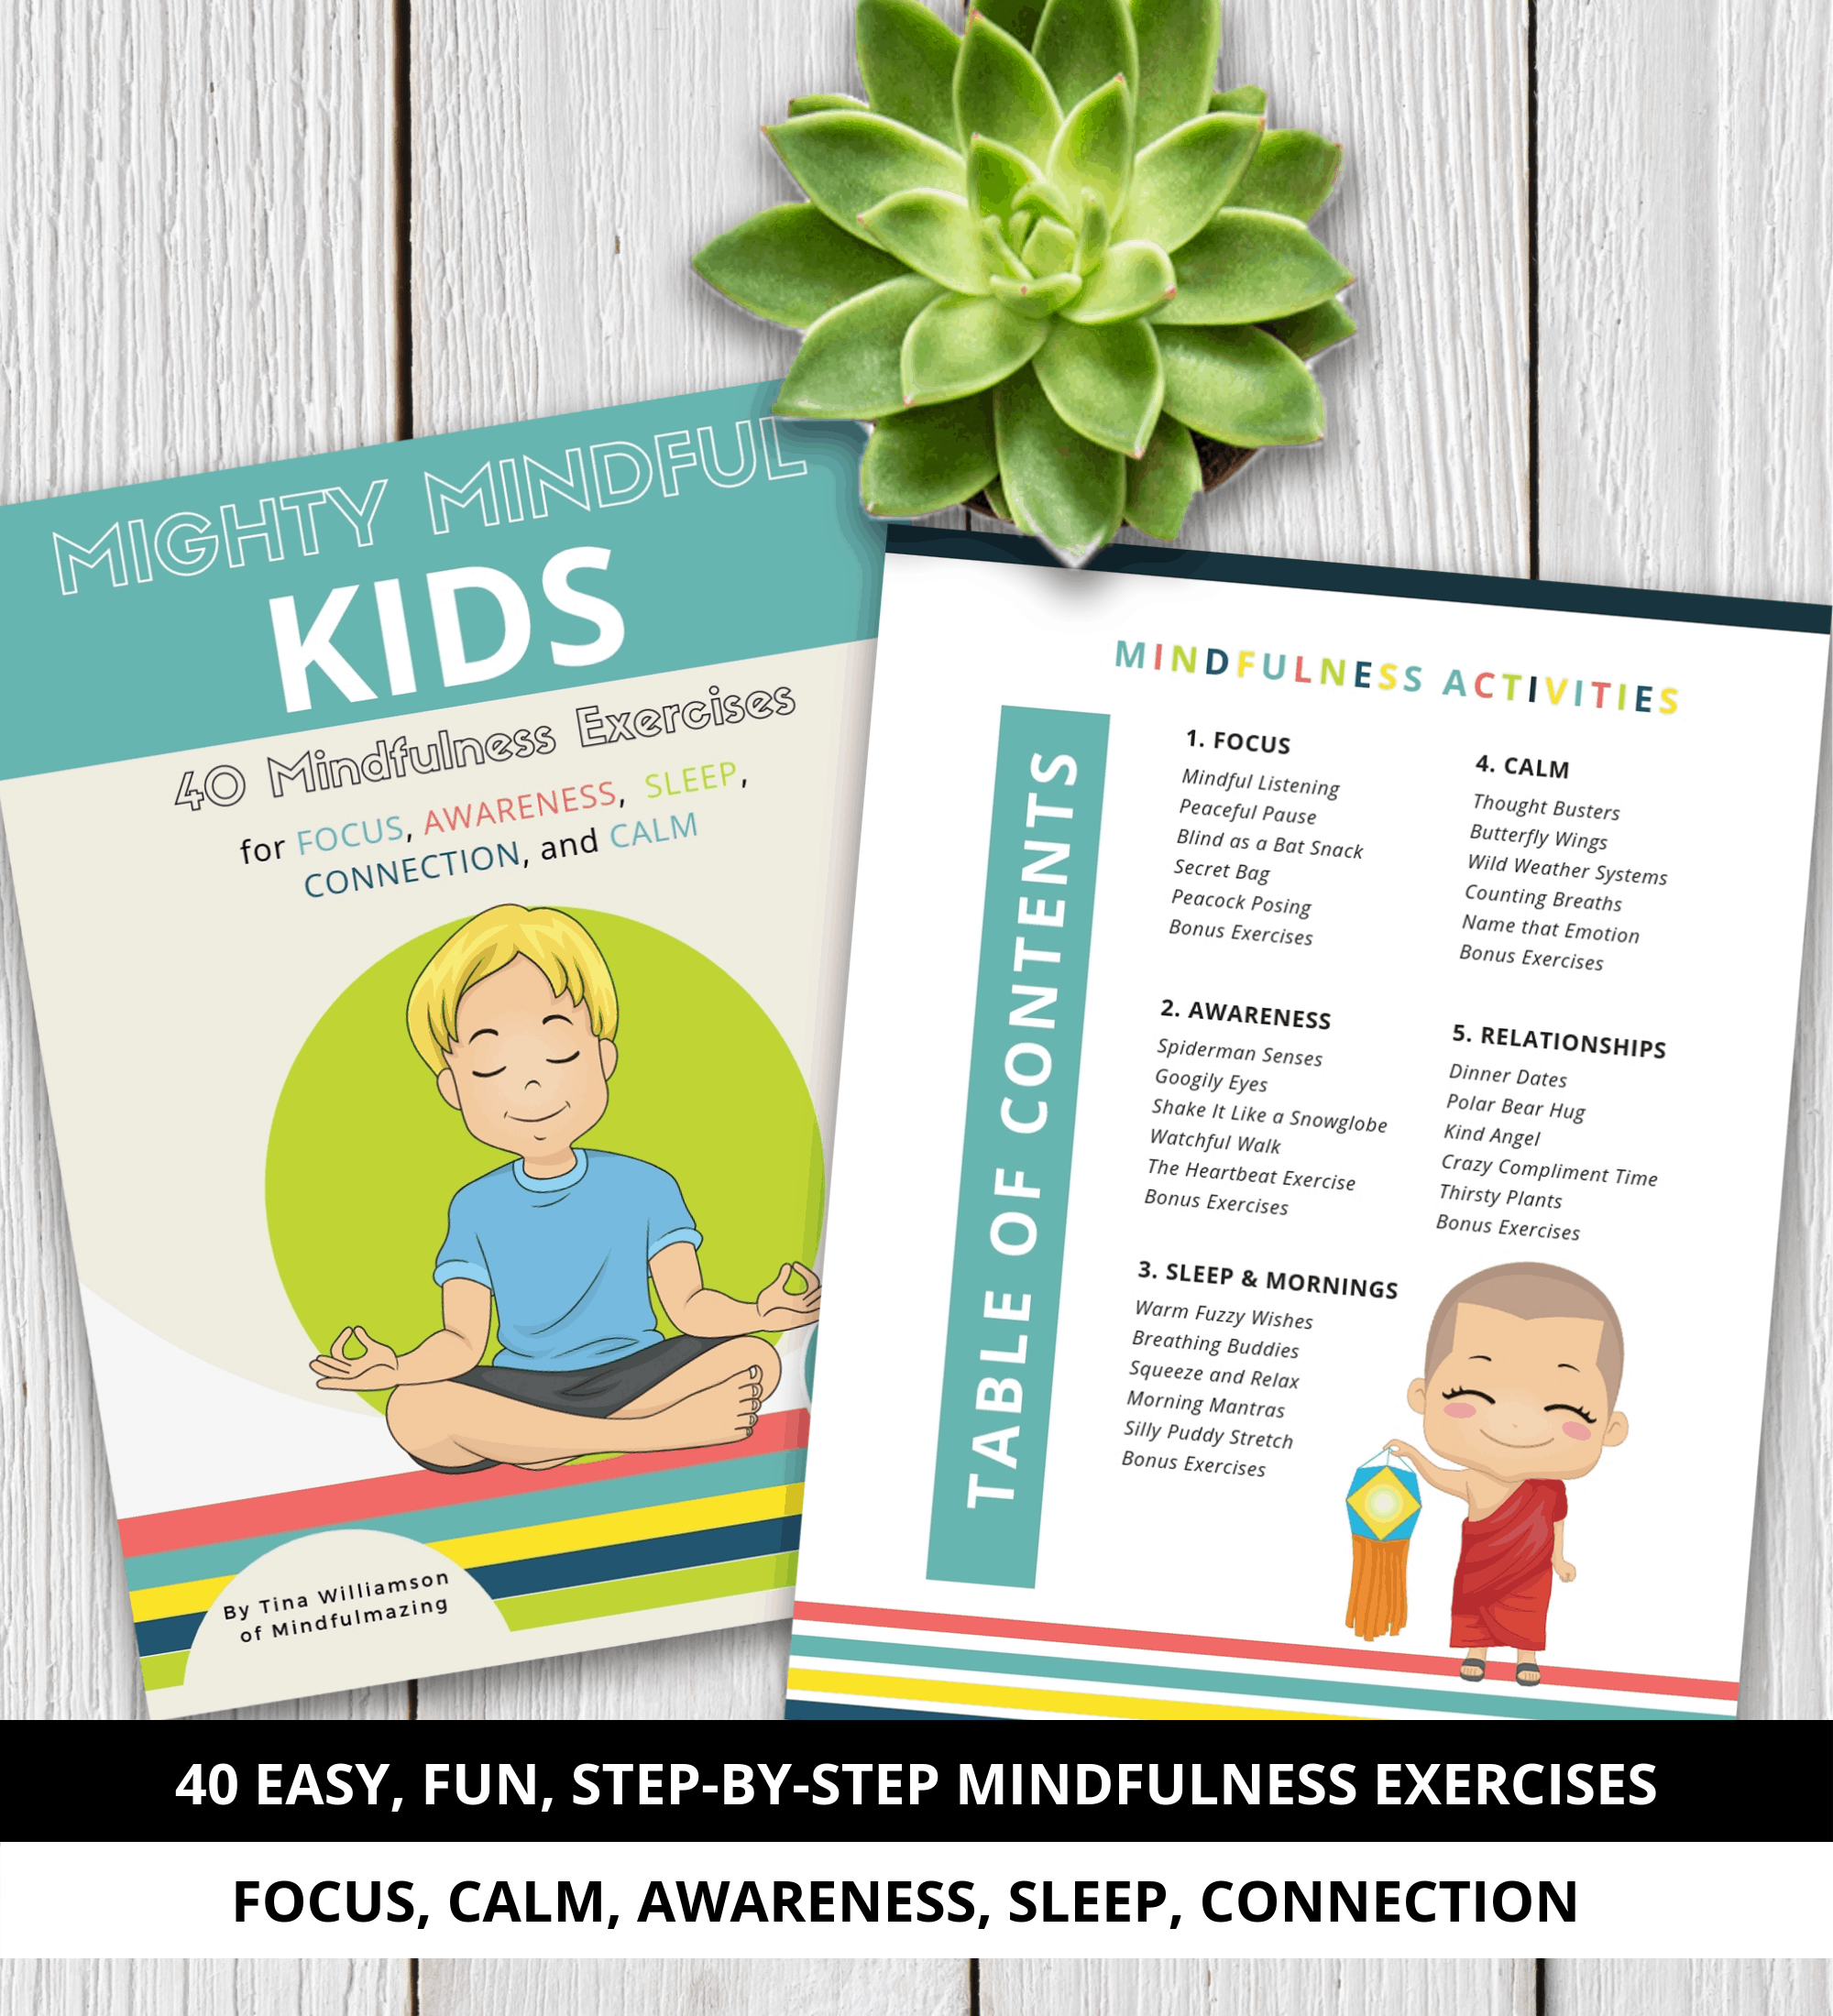 Mighty Mindful Kids PDF (ages 2-10)